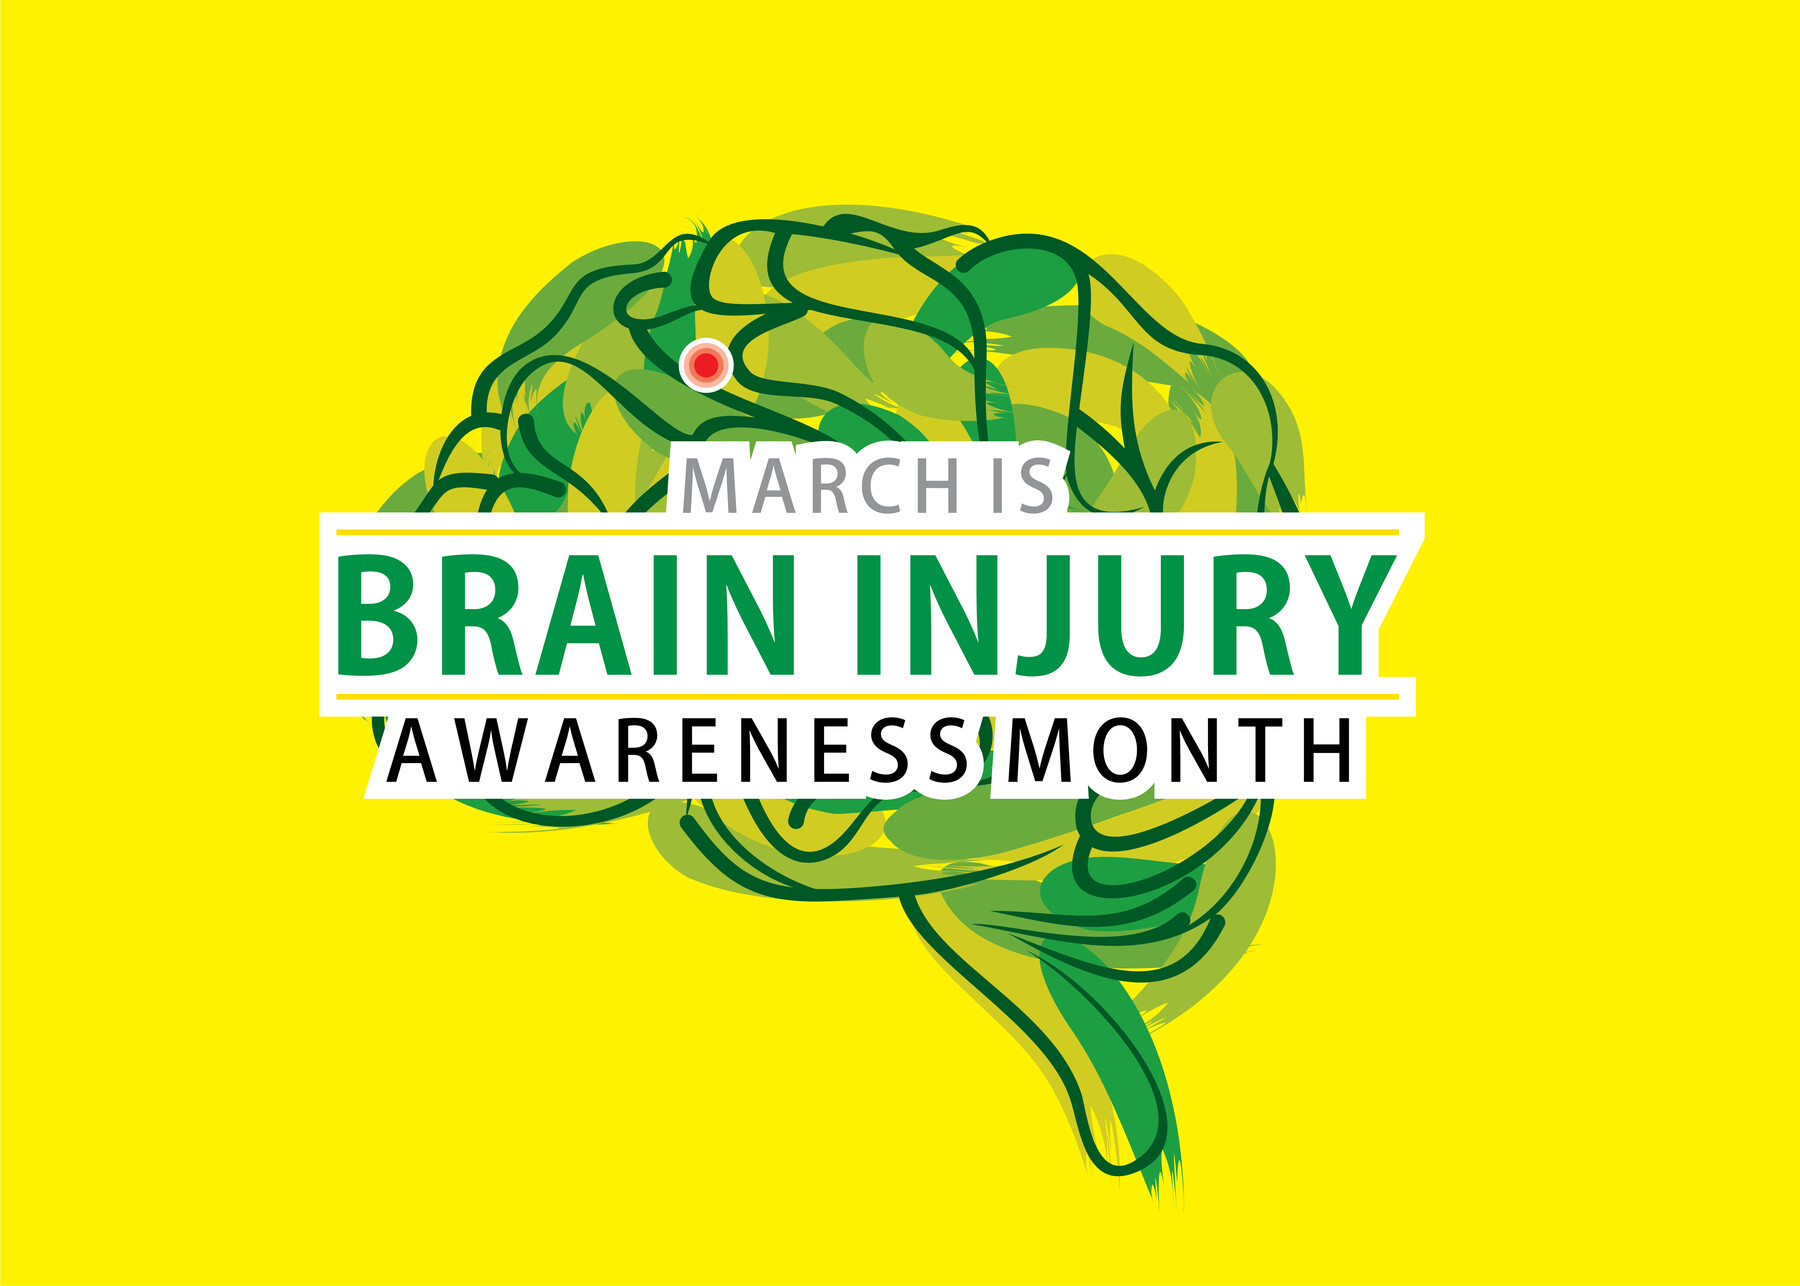 2. Every 9 seconds, someone in the US sustains a brain injury